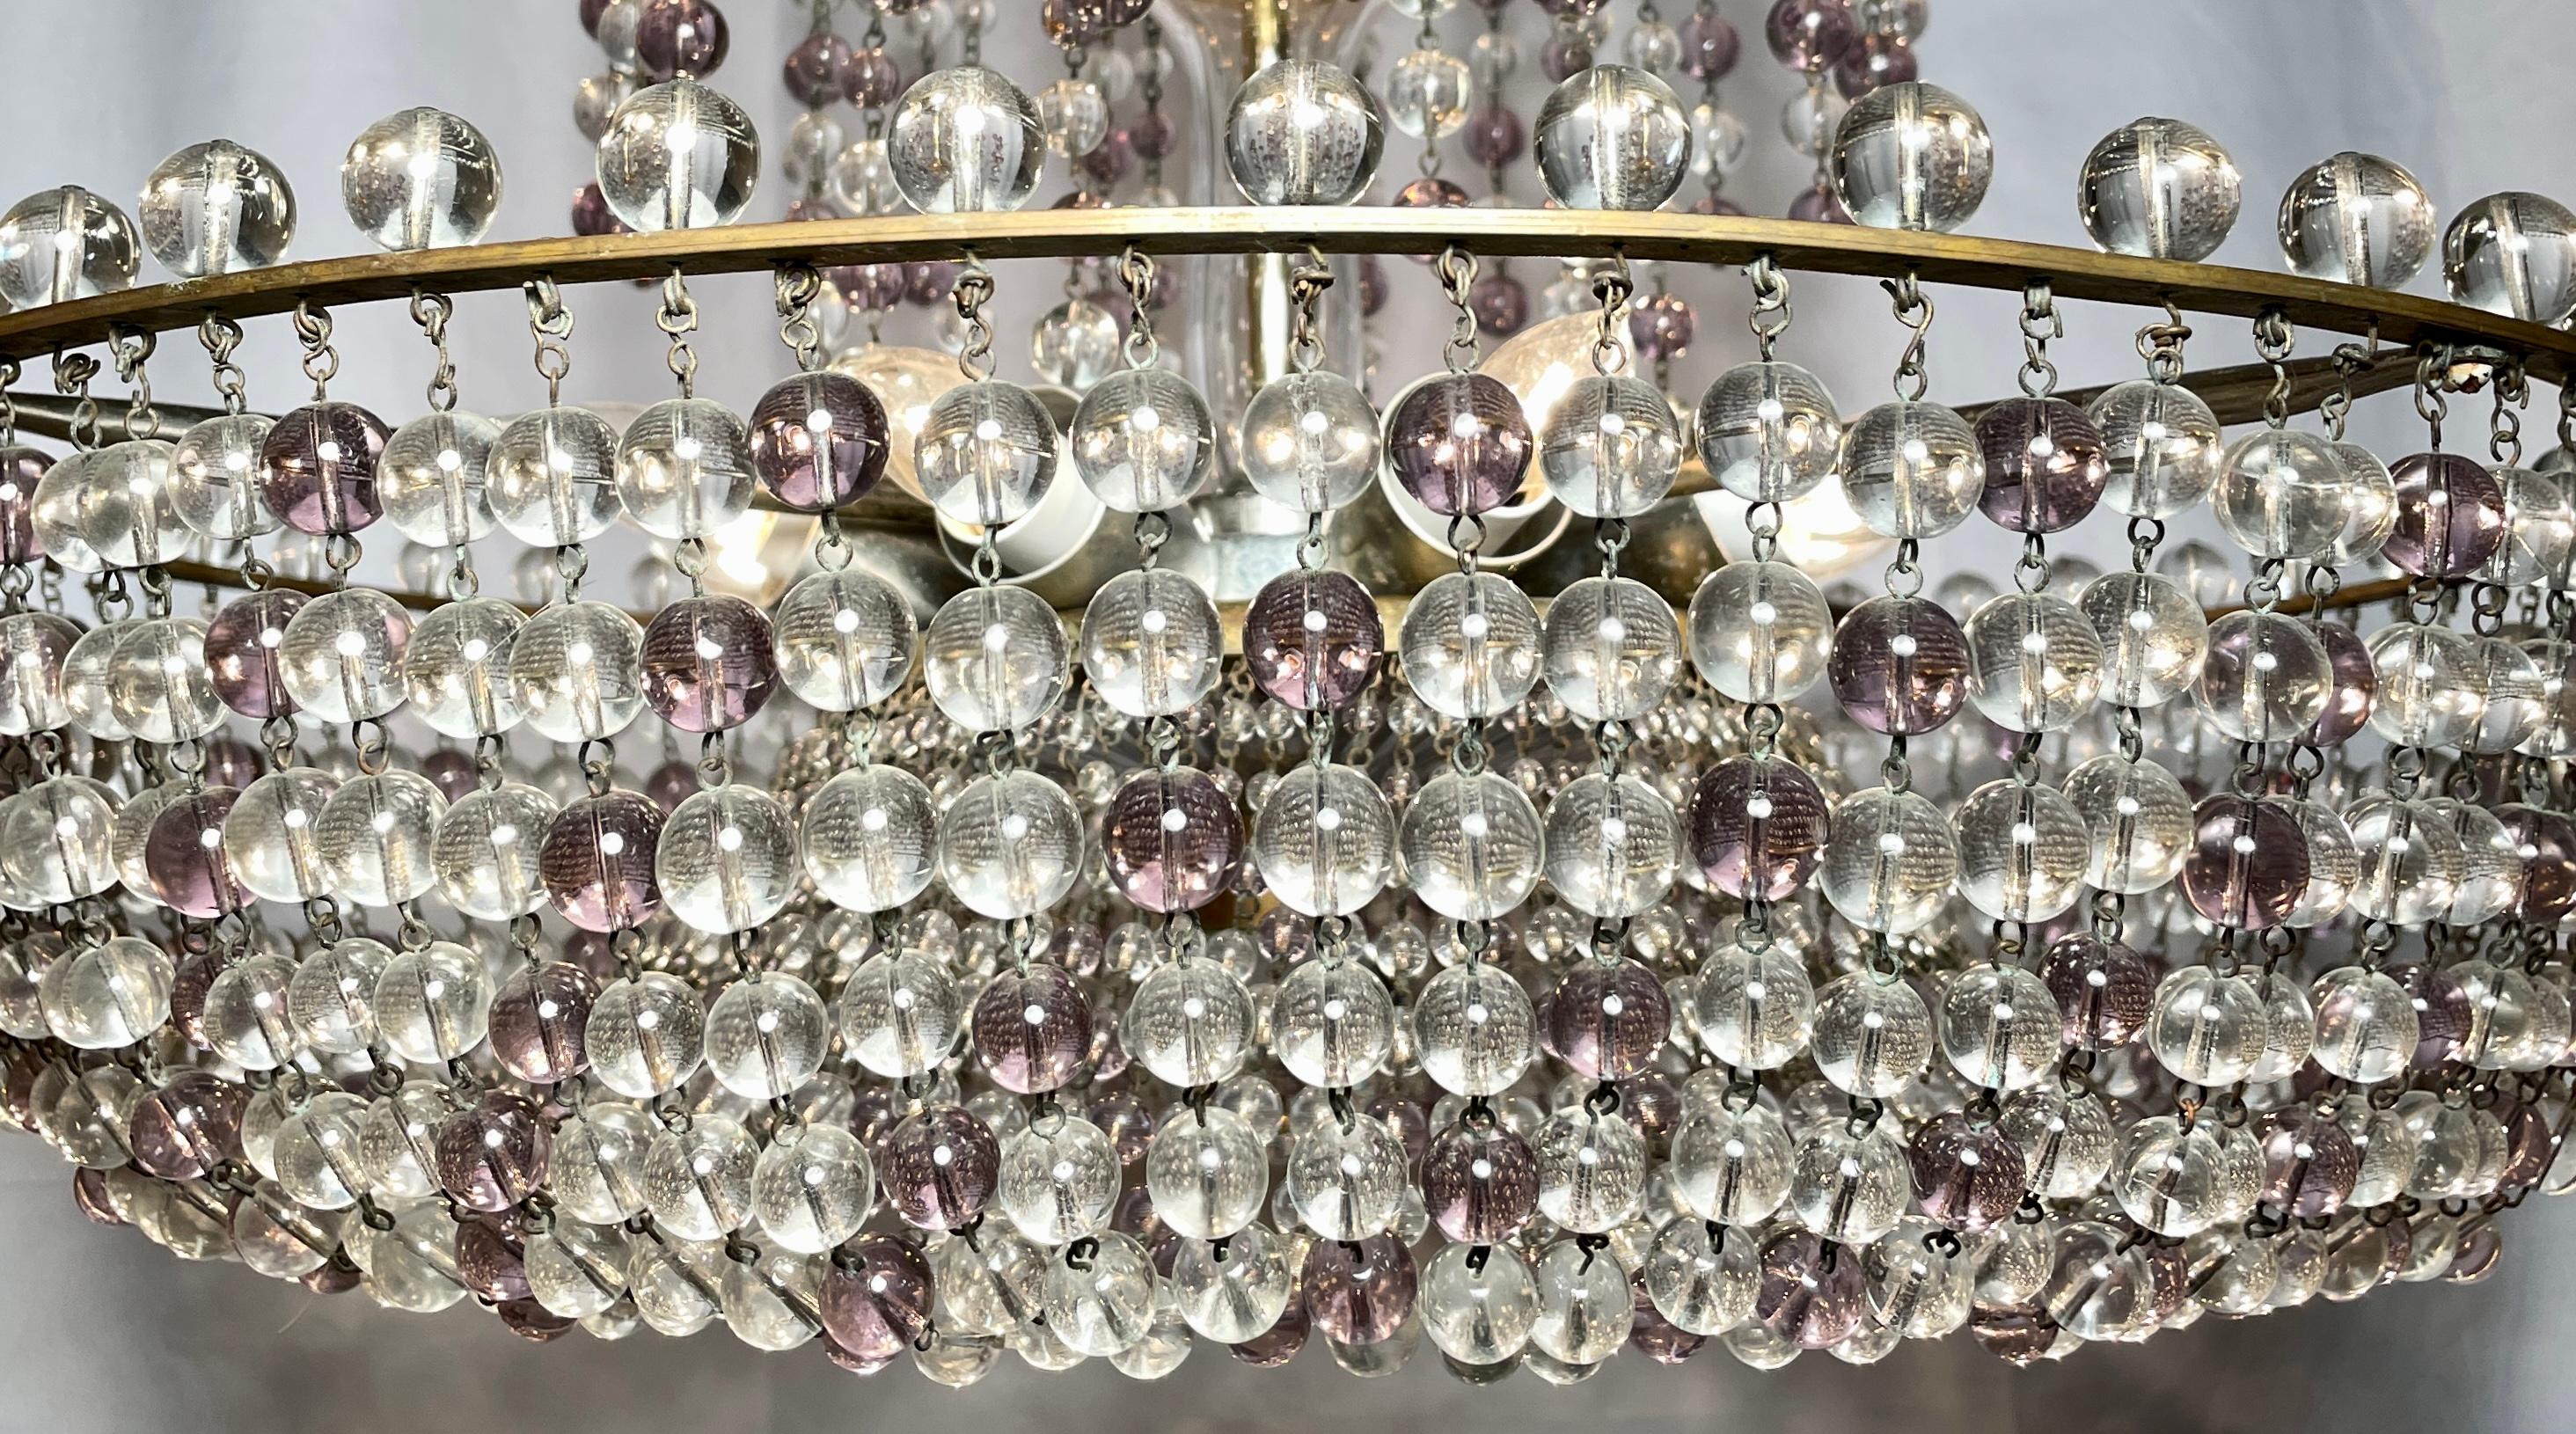 Retro Estate Amethyst and Crystal Beaded Chandelier, Circa 1950's For Sale 1